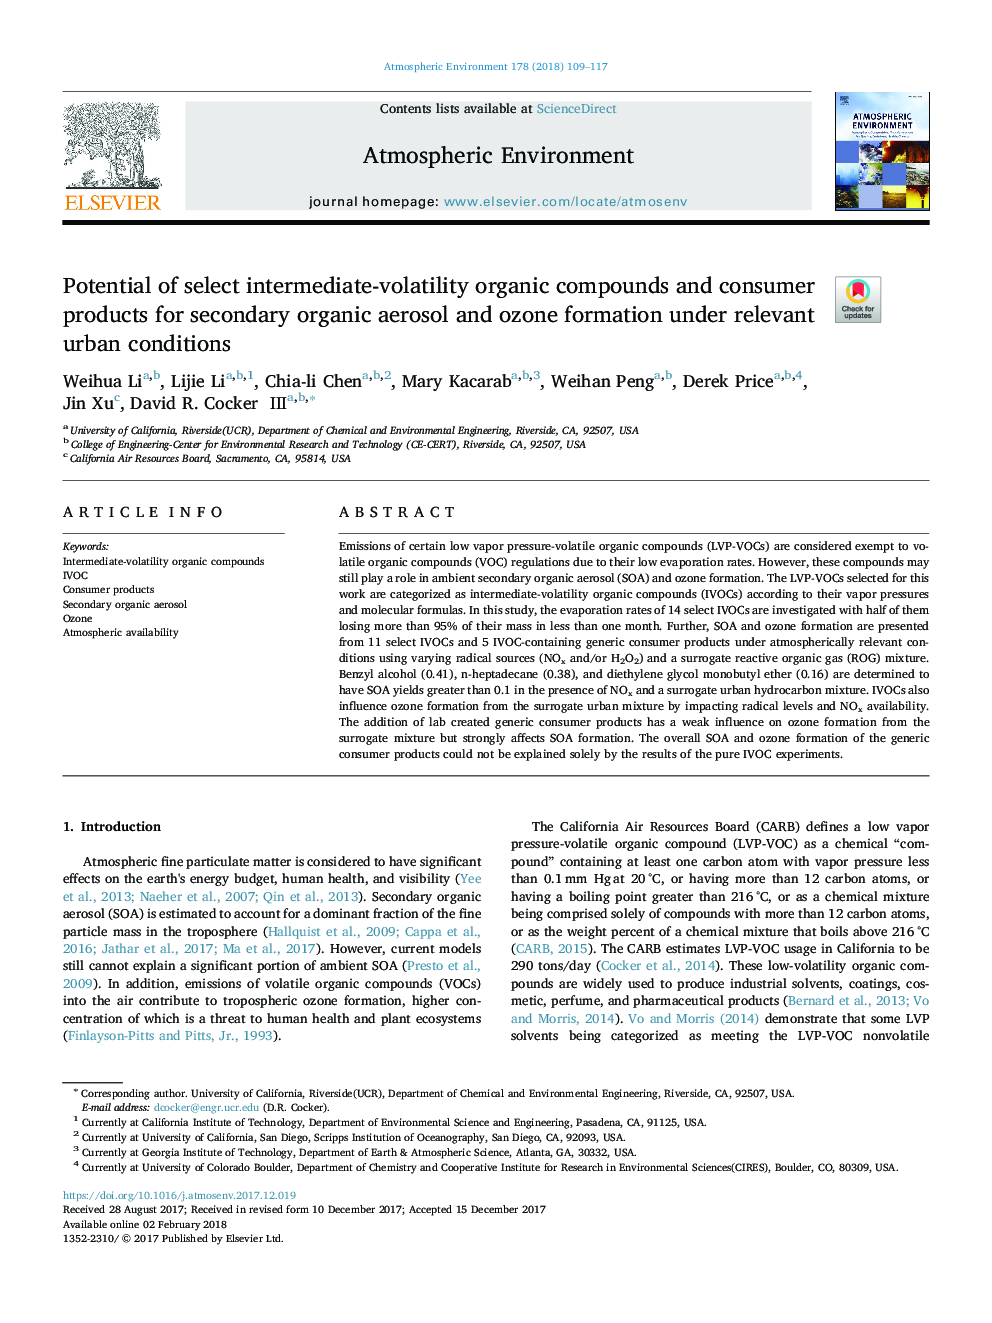 Potential of select intermediate-volatility organic compounds and consumer products for secondary organic aerosol and ozone formation under relevant urban conditions